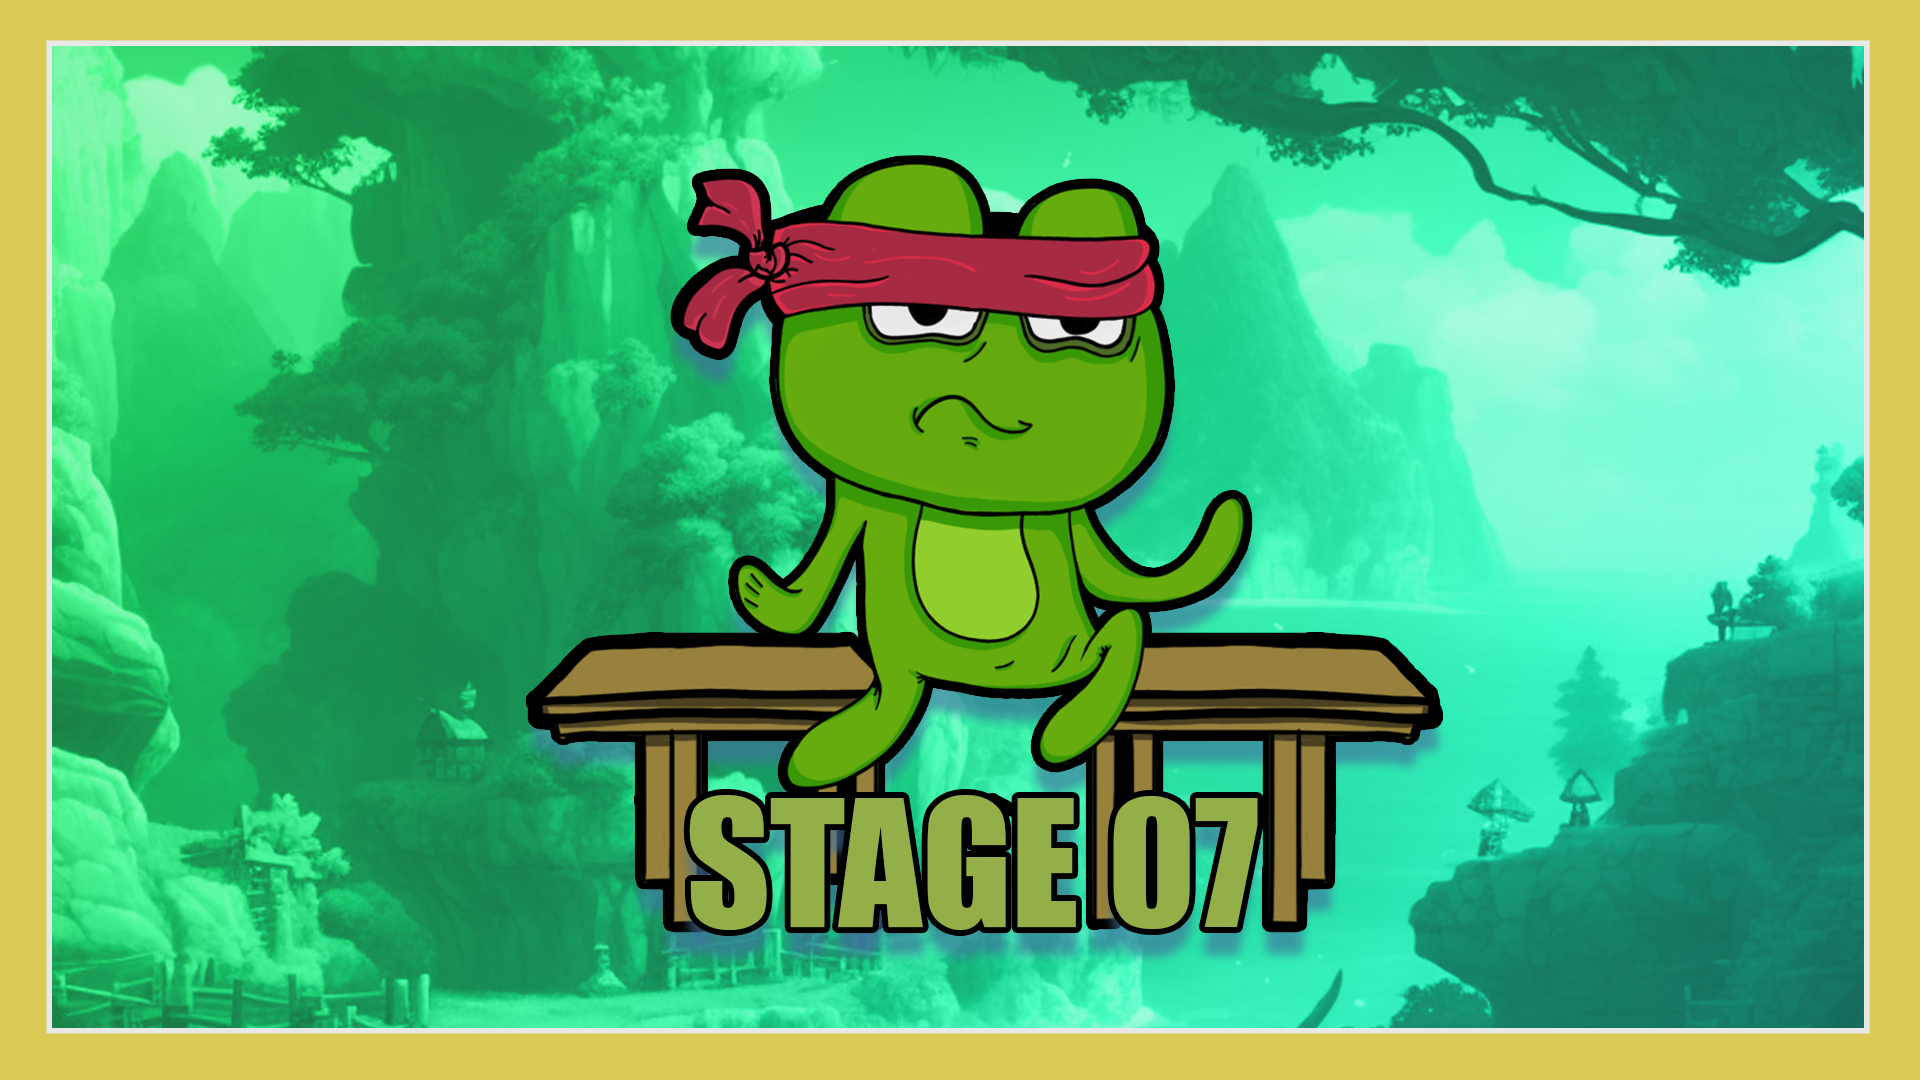 STAGE 07